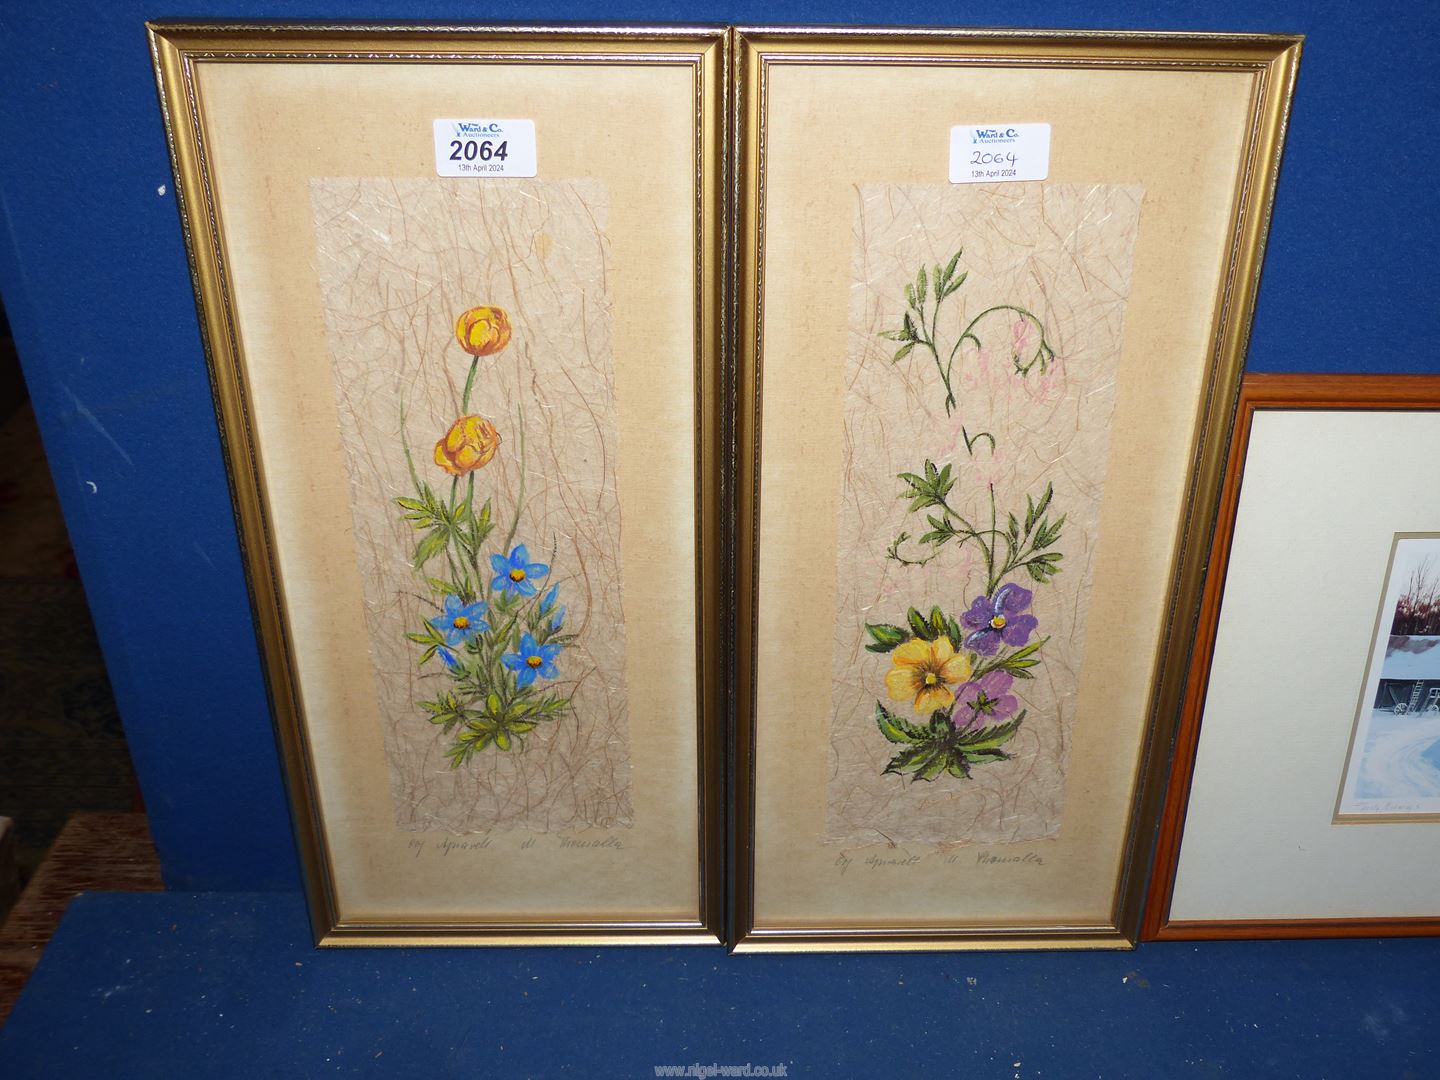 A pair of framed floral paintings on hand-made paper along with 'Frosty Mornings' framed and - Image 2 of 3